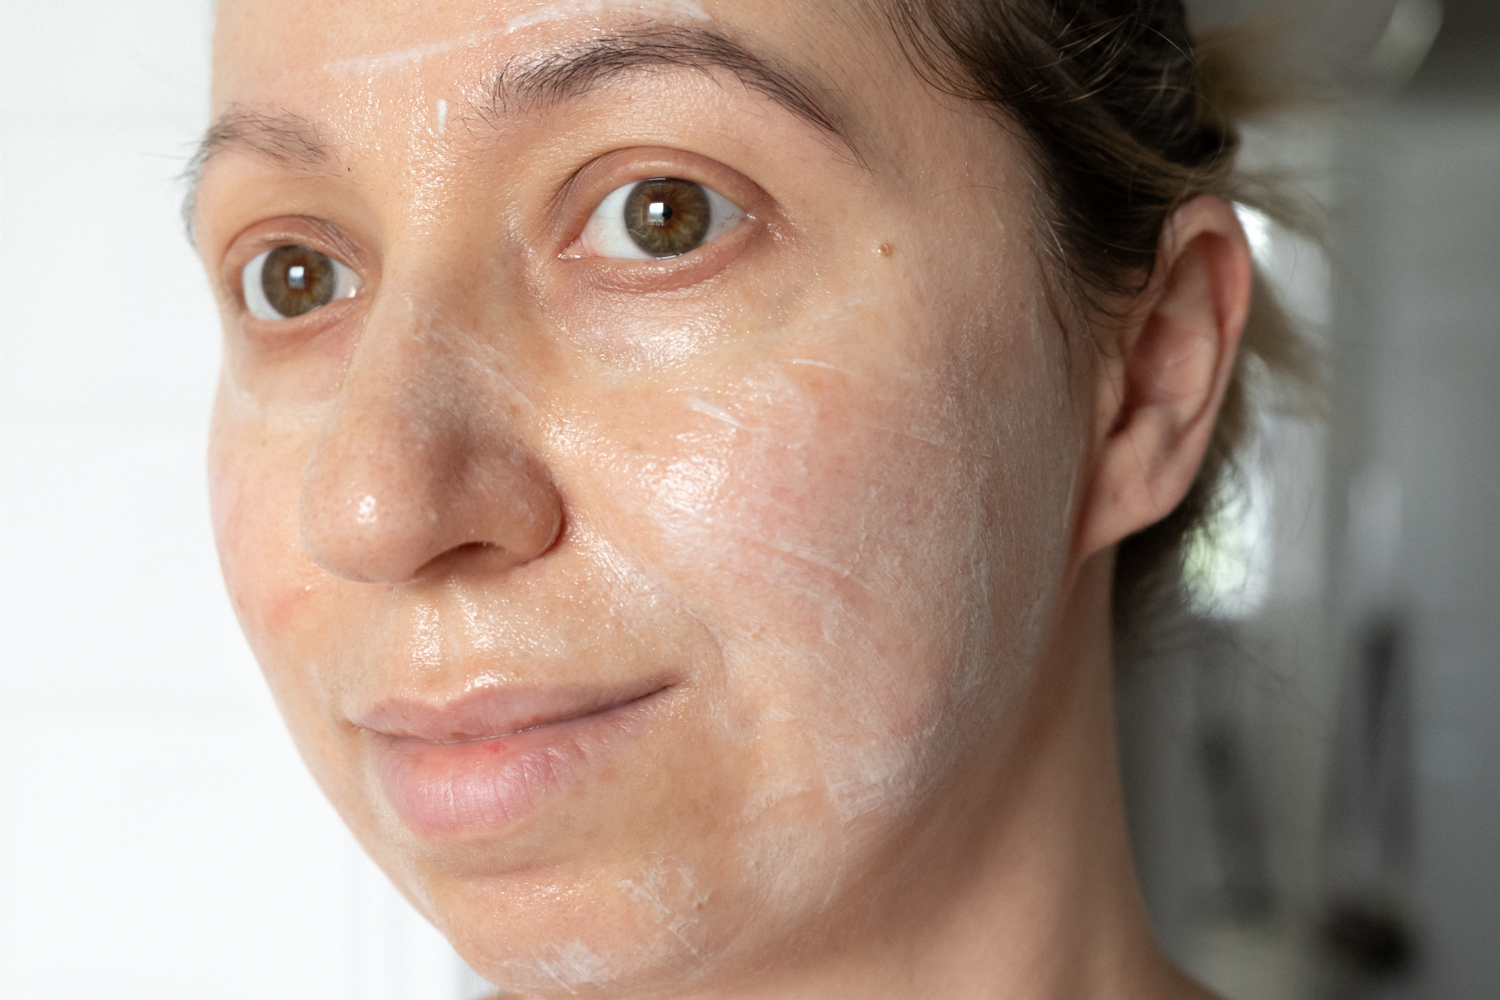 Person applying Clarins Cryo Flash Cream Mask evenly on their face, enjoying a refreshing skincare routine.